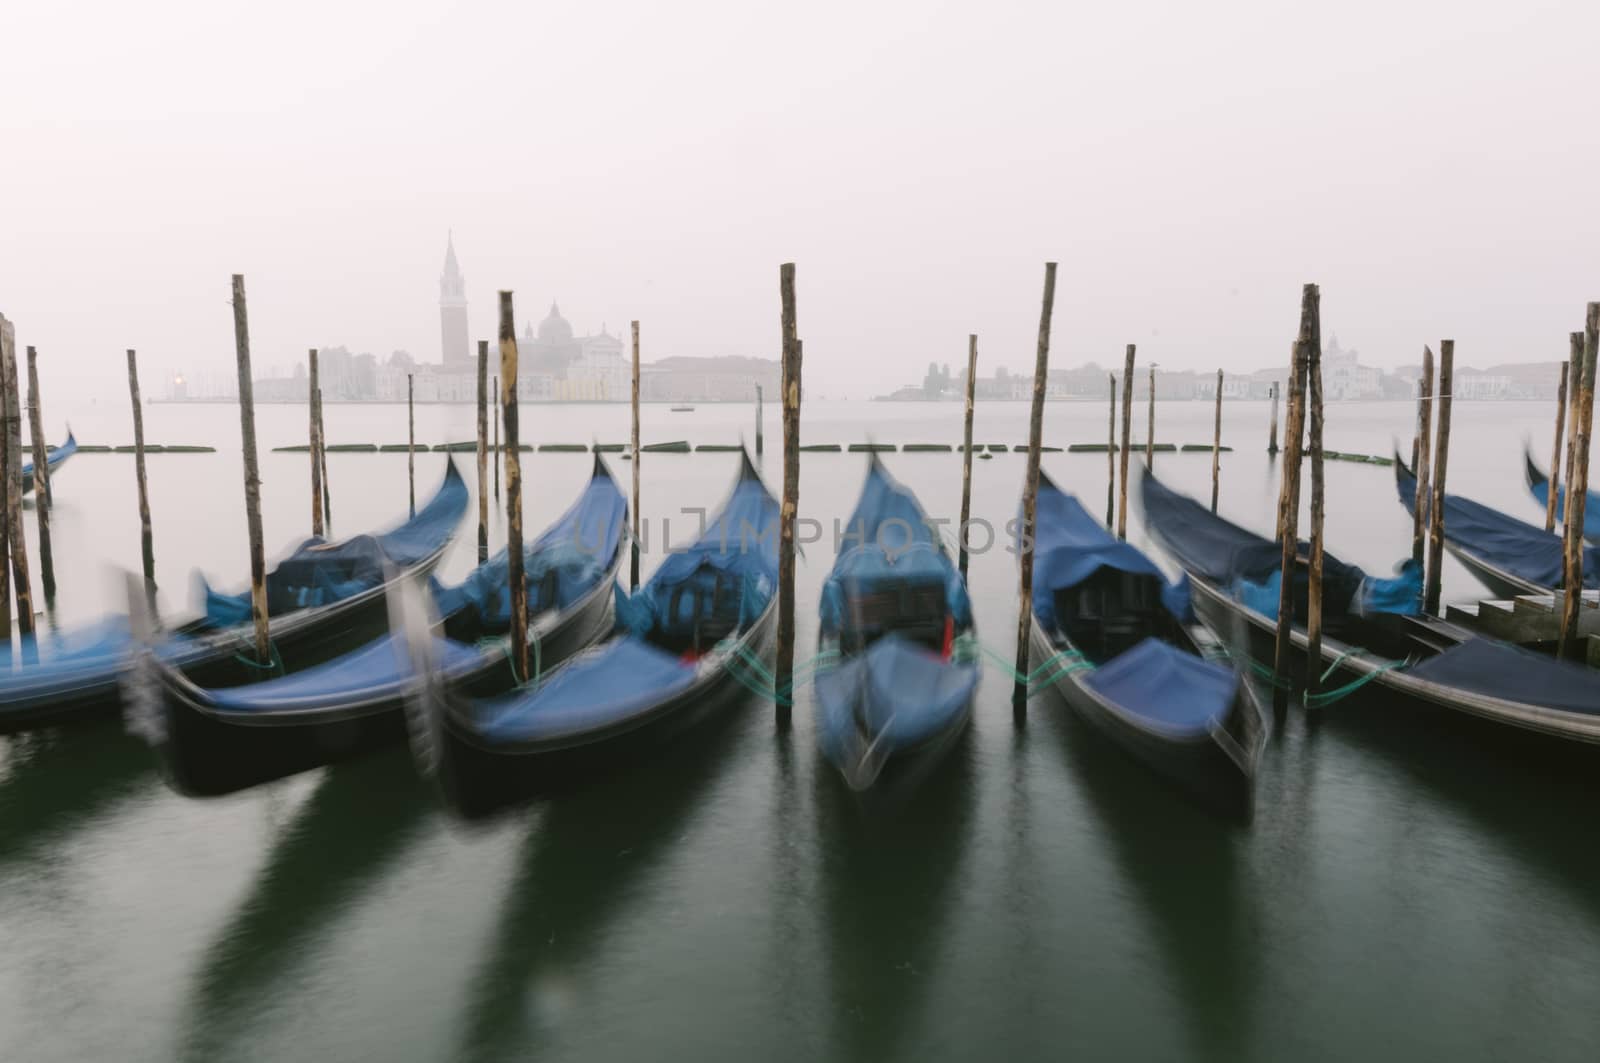 Gondolas at their moorings in Venice, Veneto, Italy, Europe by ale_rizzo